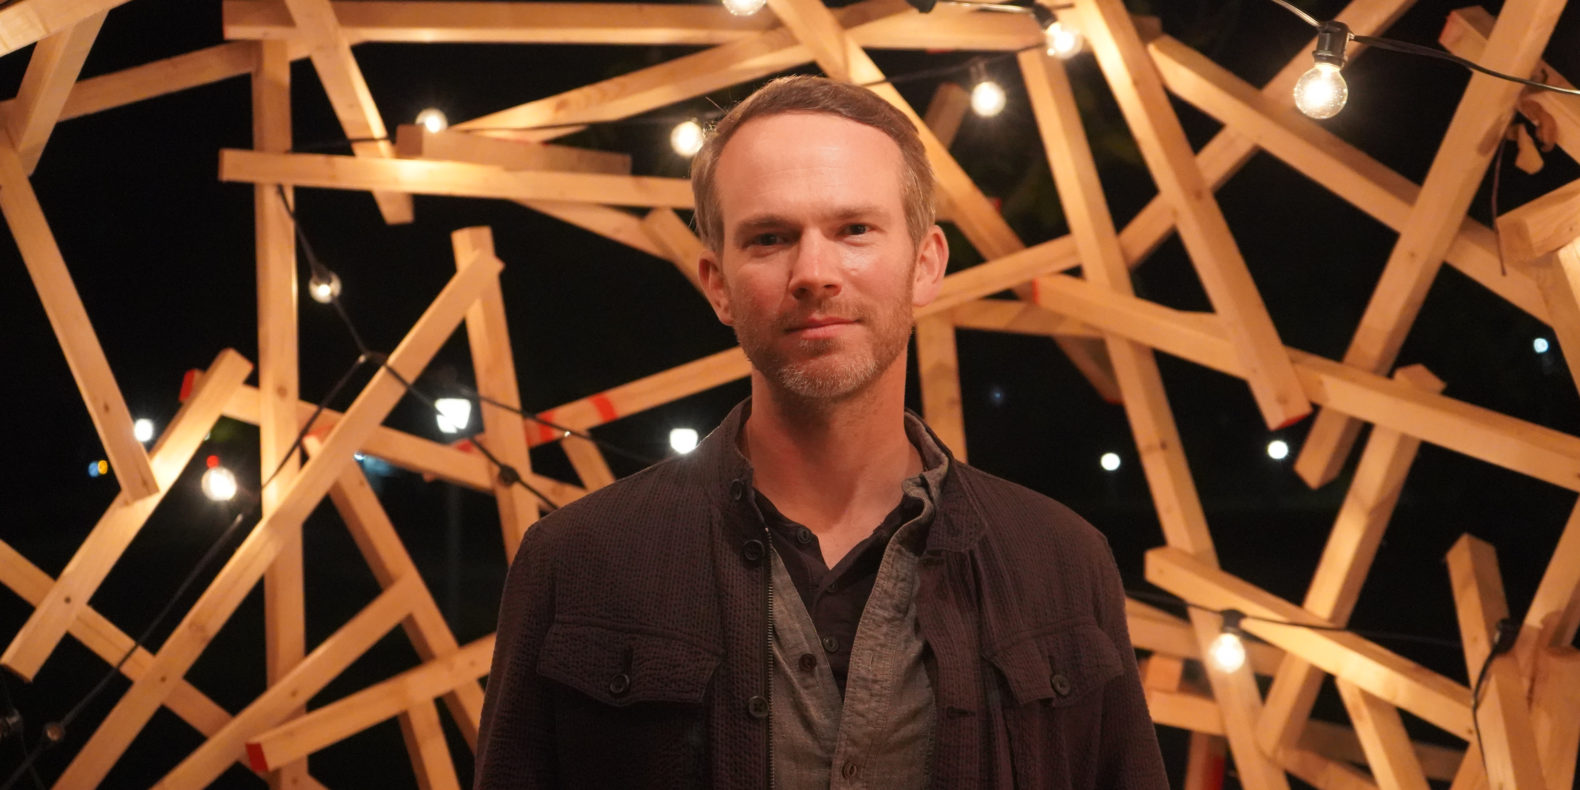 Musician Andy Wrba in front of a wooden sculpture with hanging lights